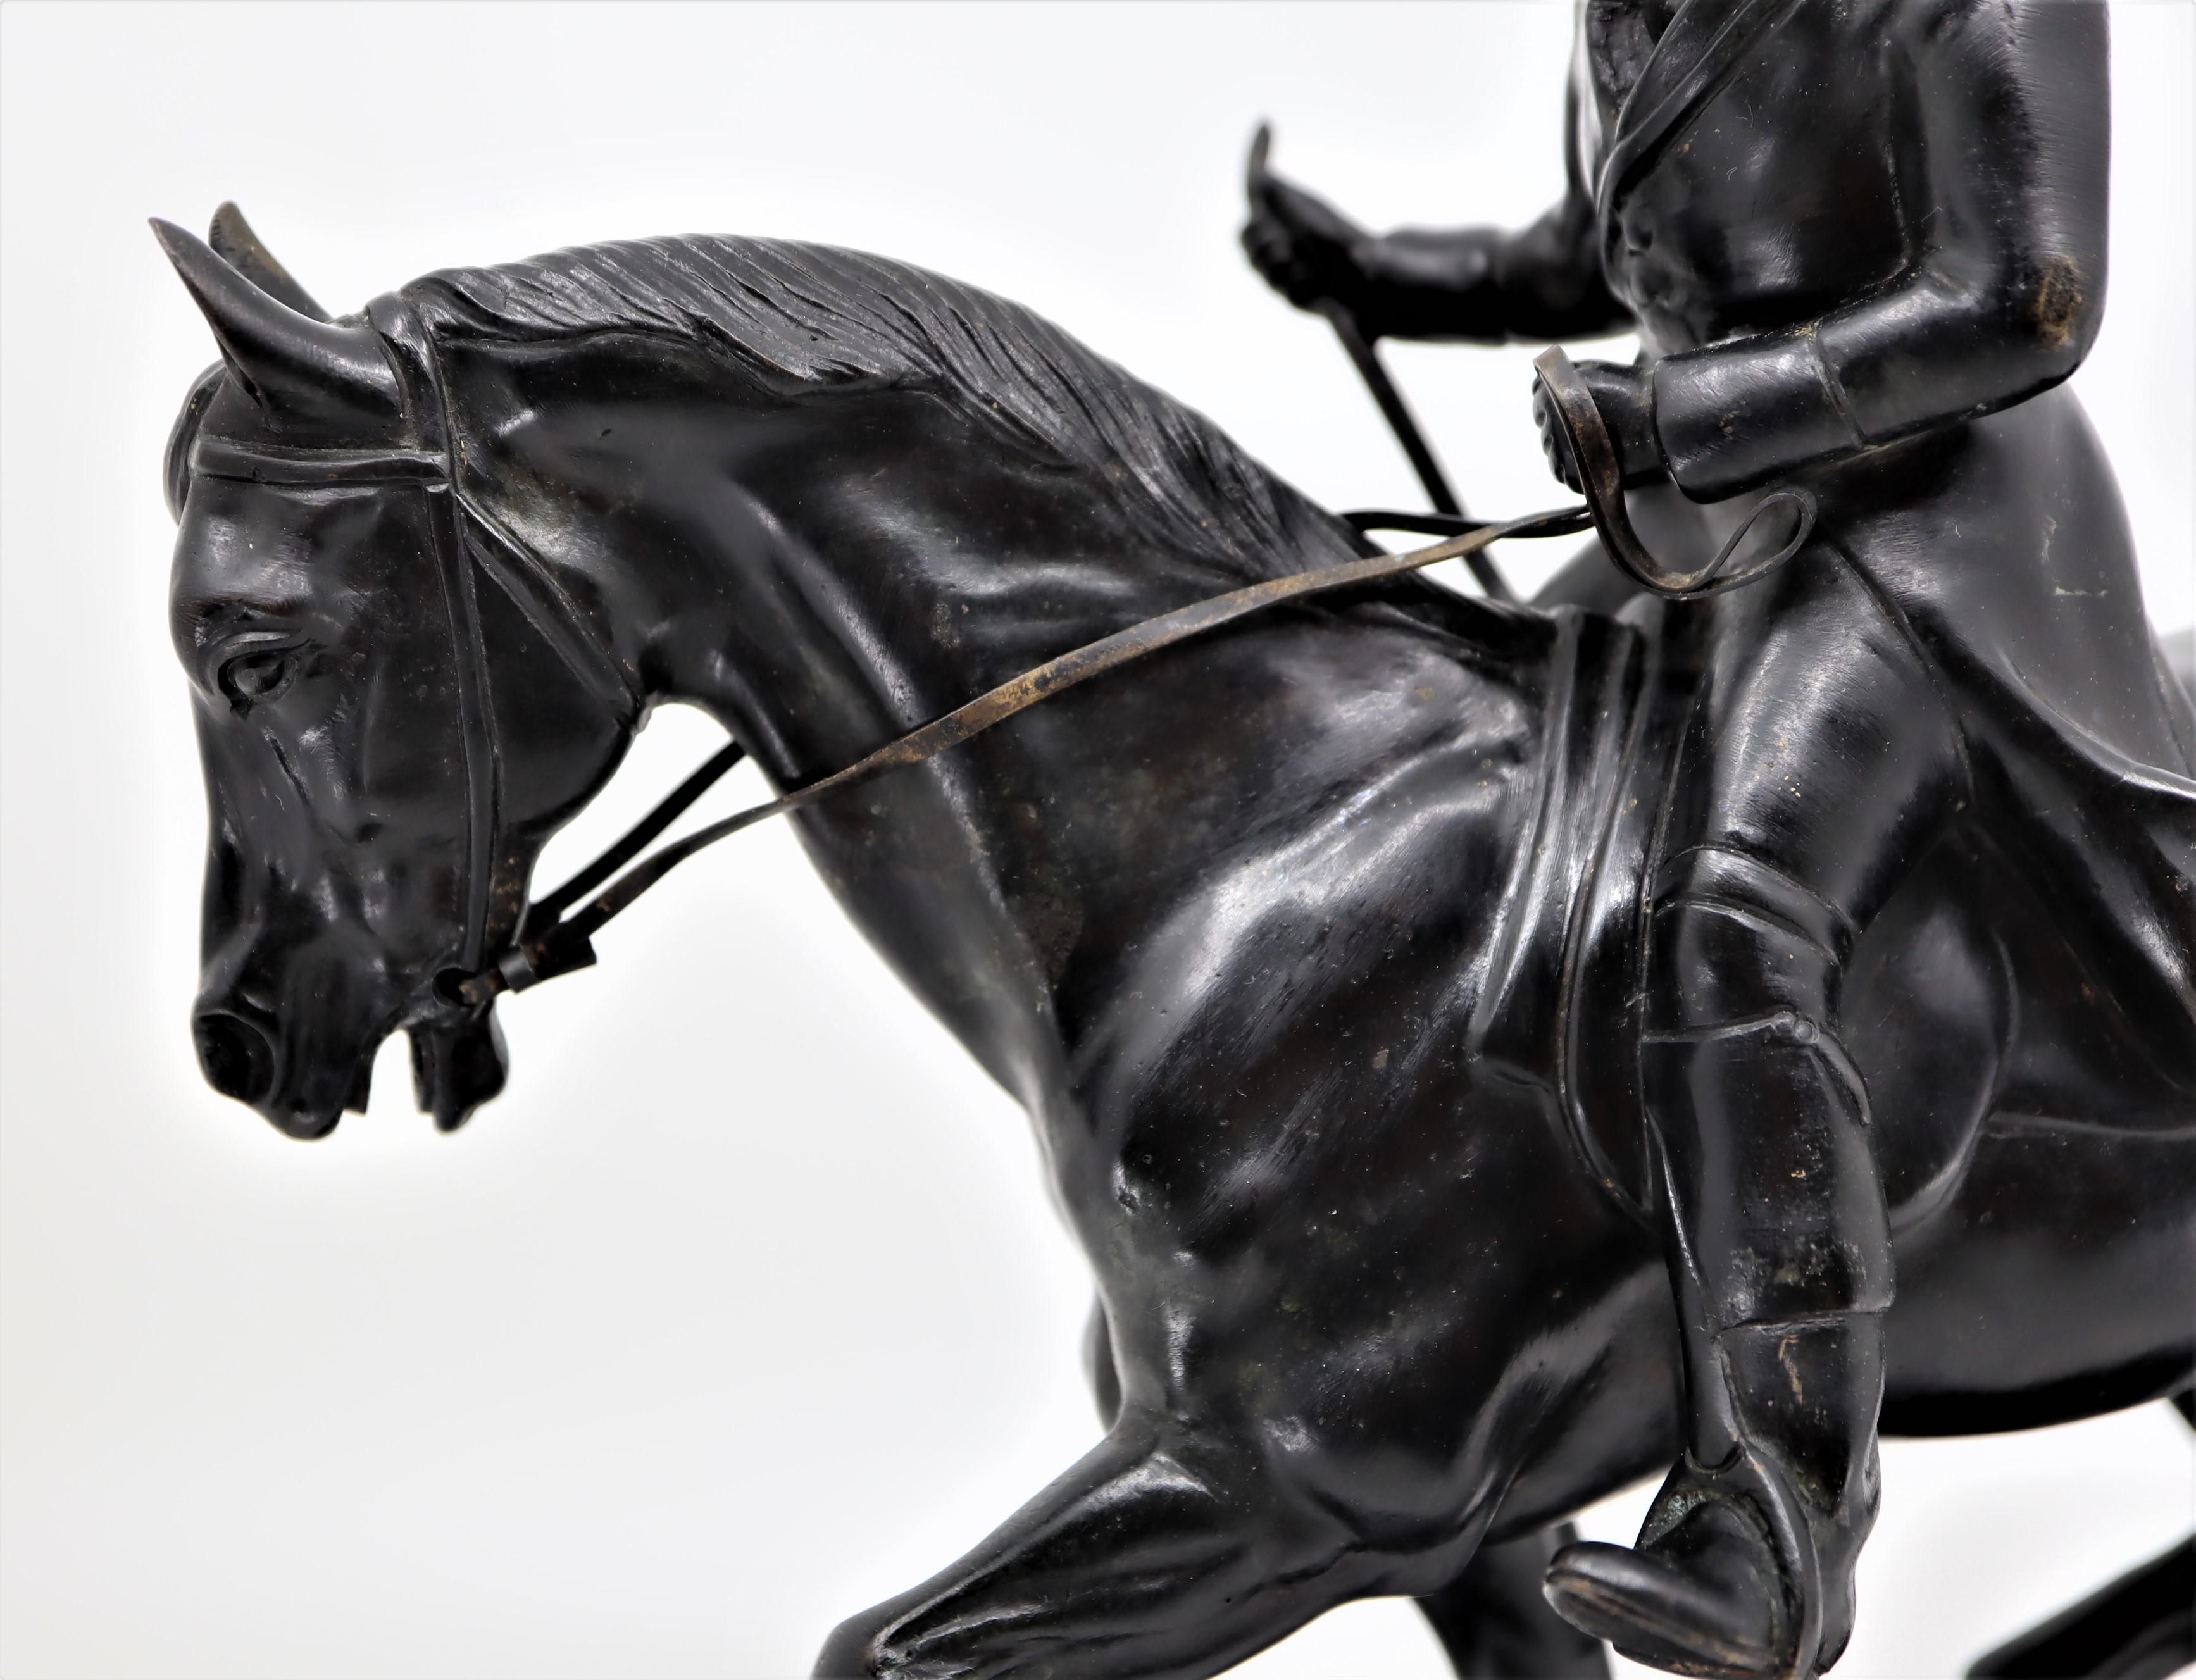 Late Victorian Equestrian Statue of a Huntsman, Gaston D’Illiers, France